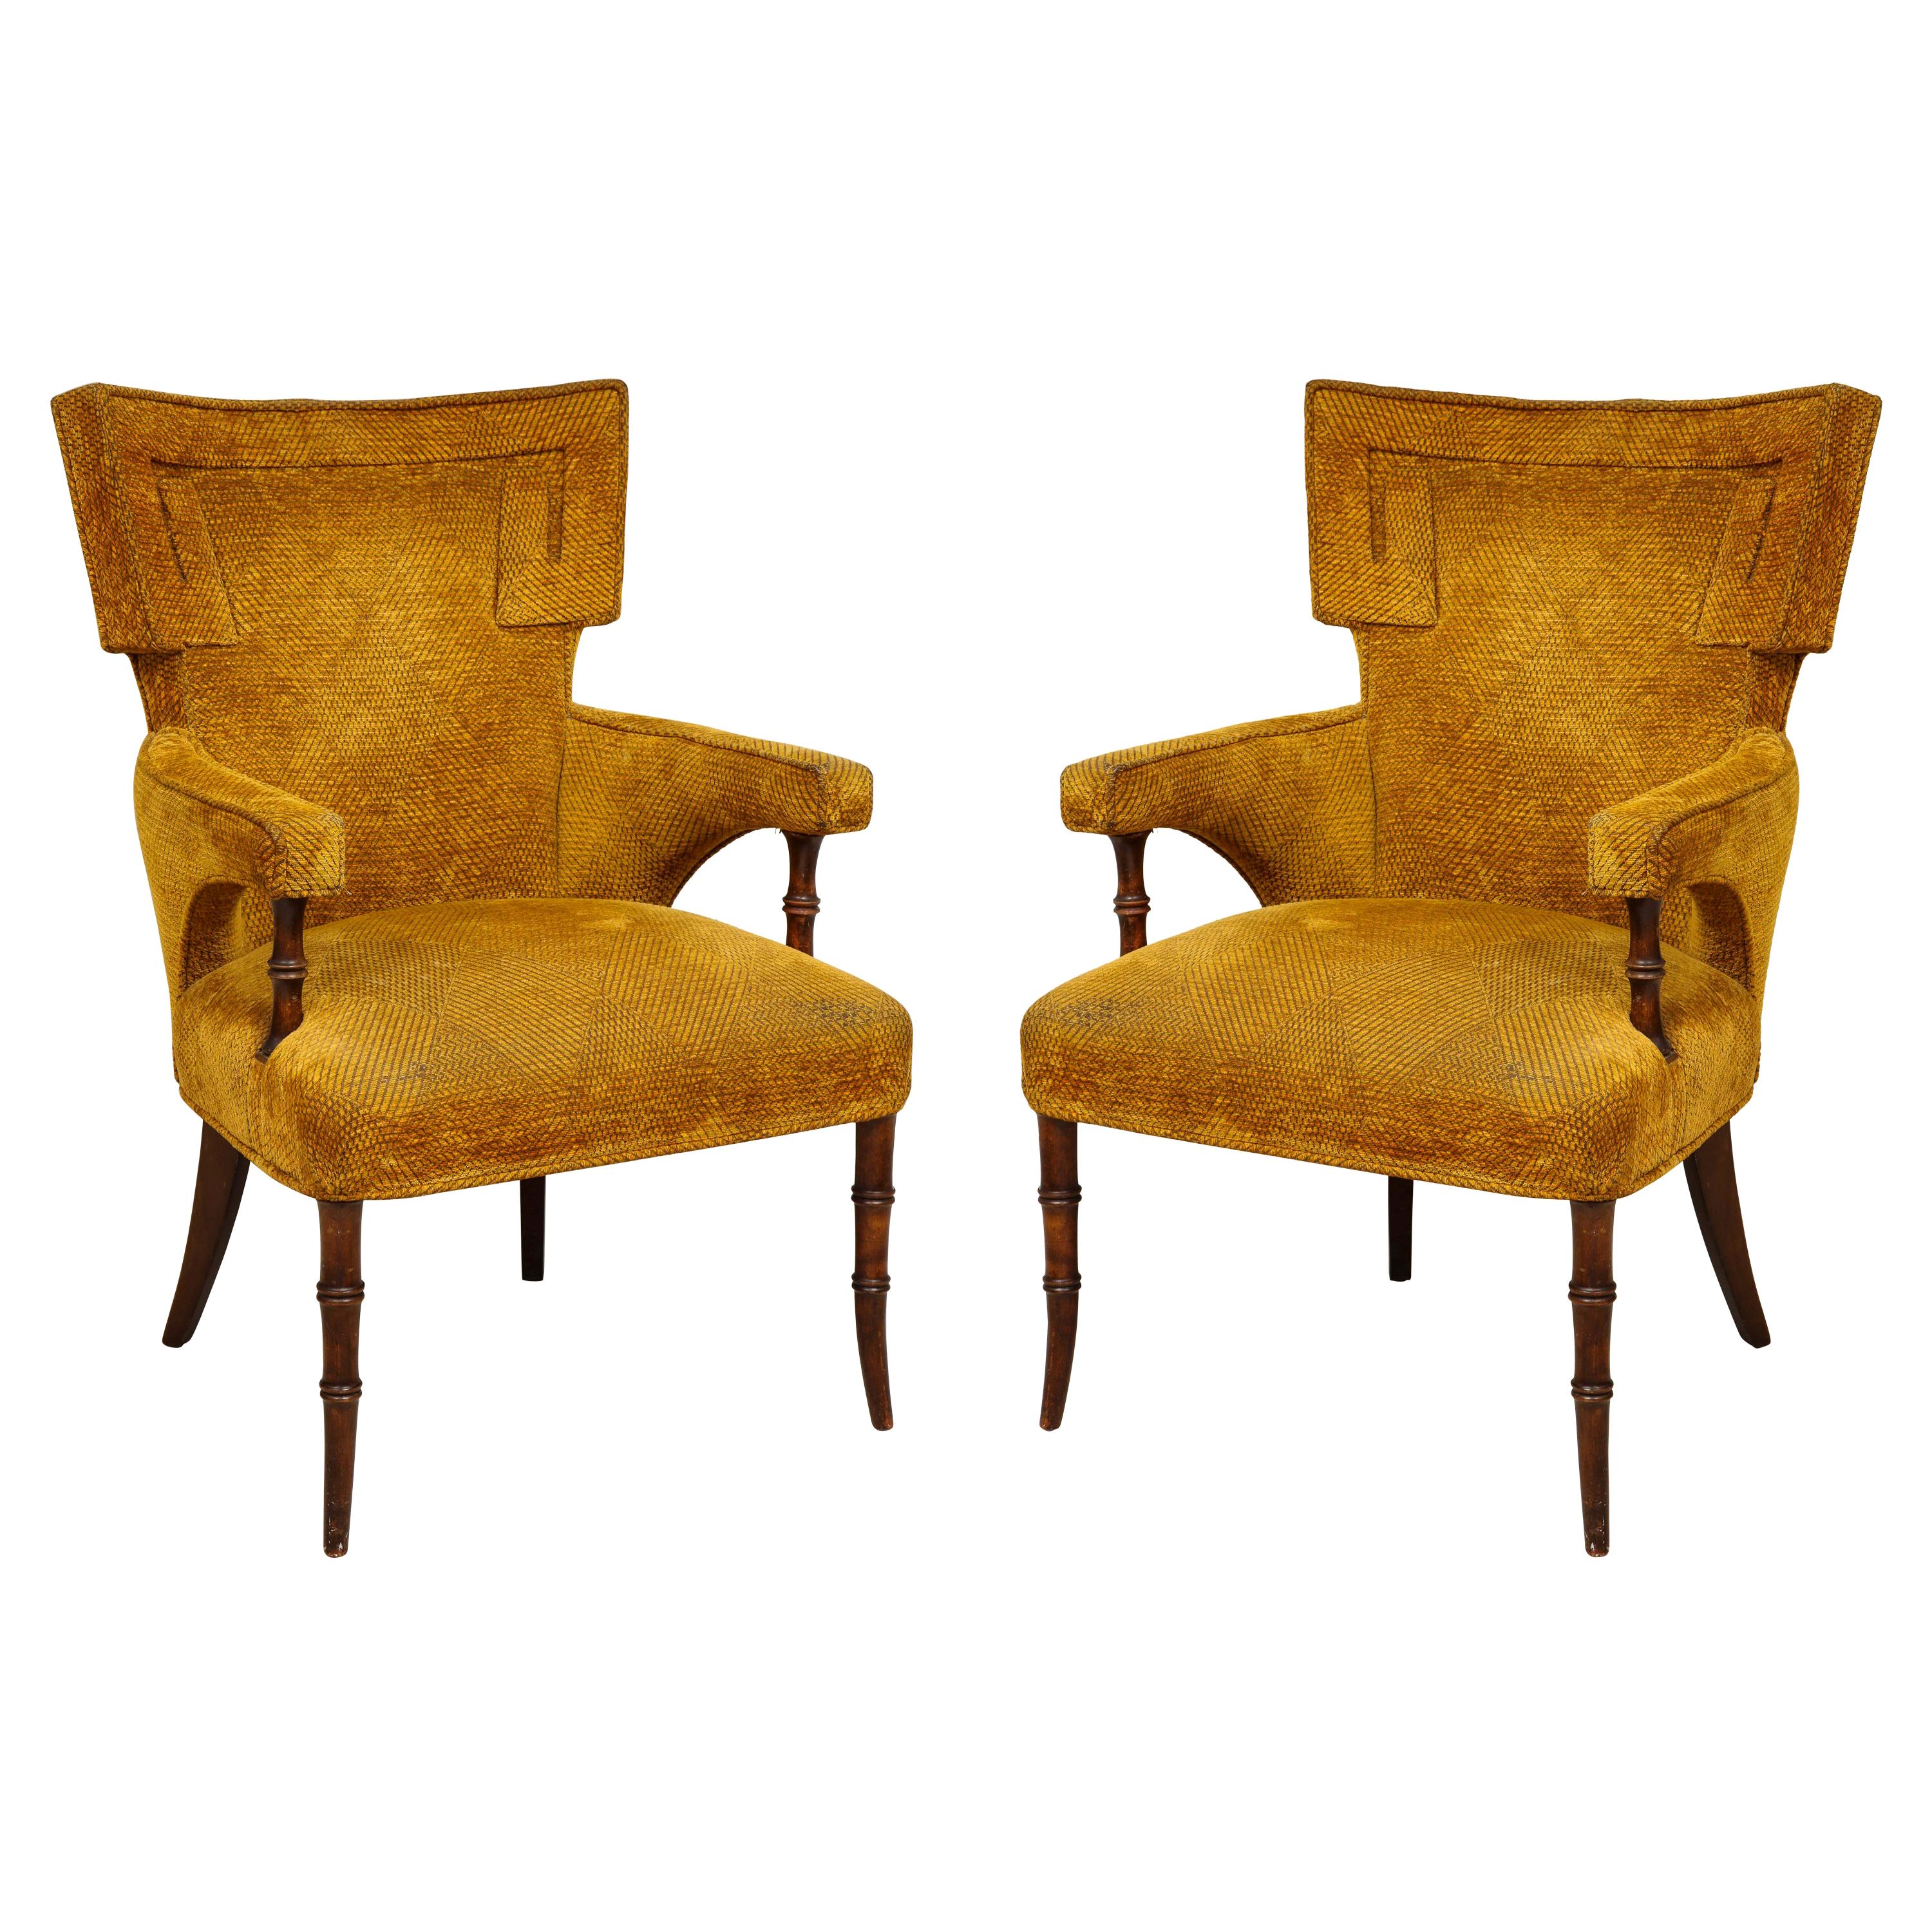 Pair of Upholstered Faux-Bamboo Fireside Armchairs